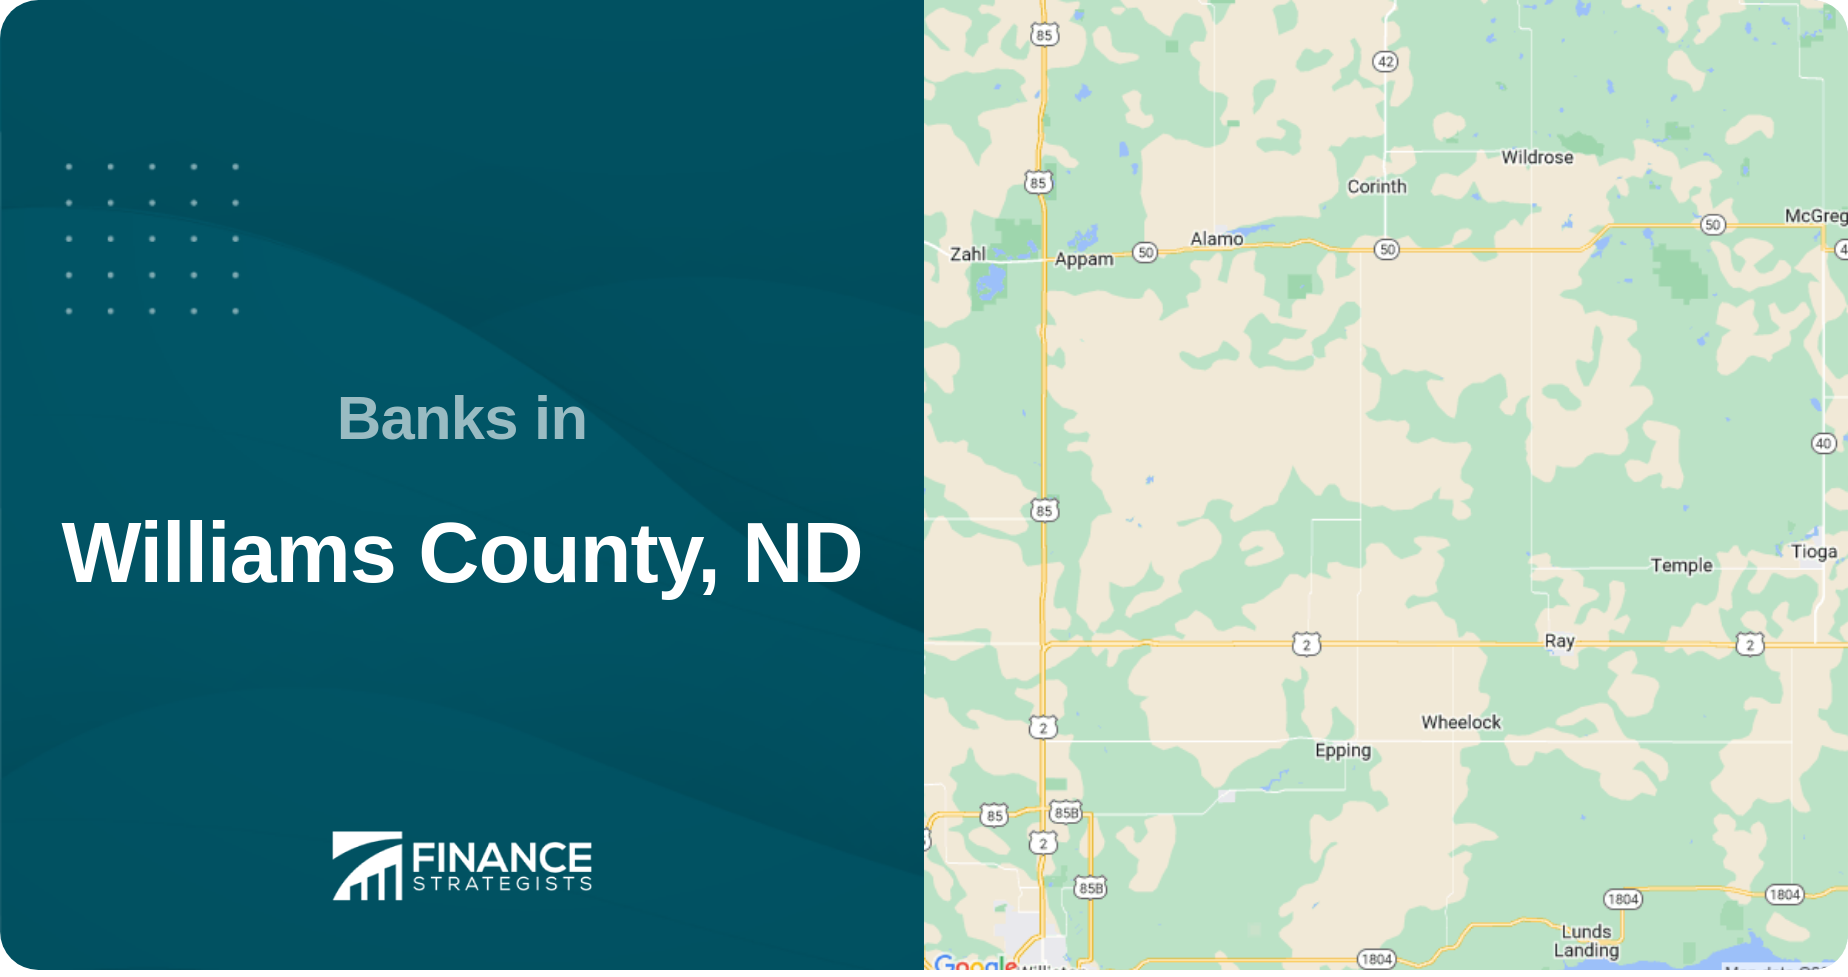 Banks in Williams County, ND